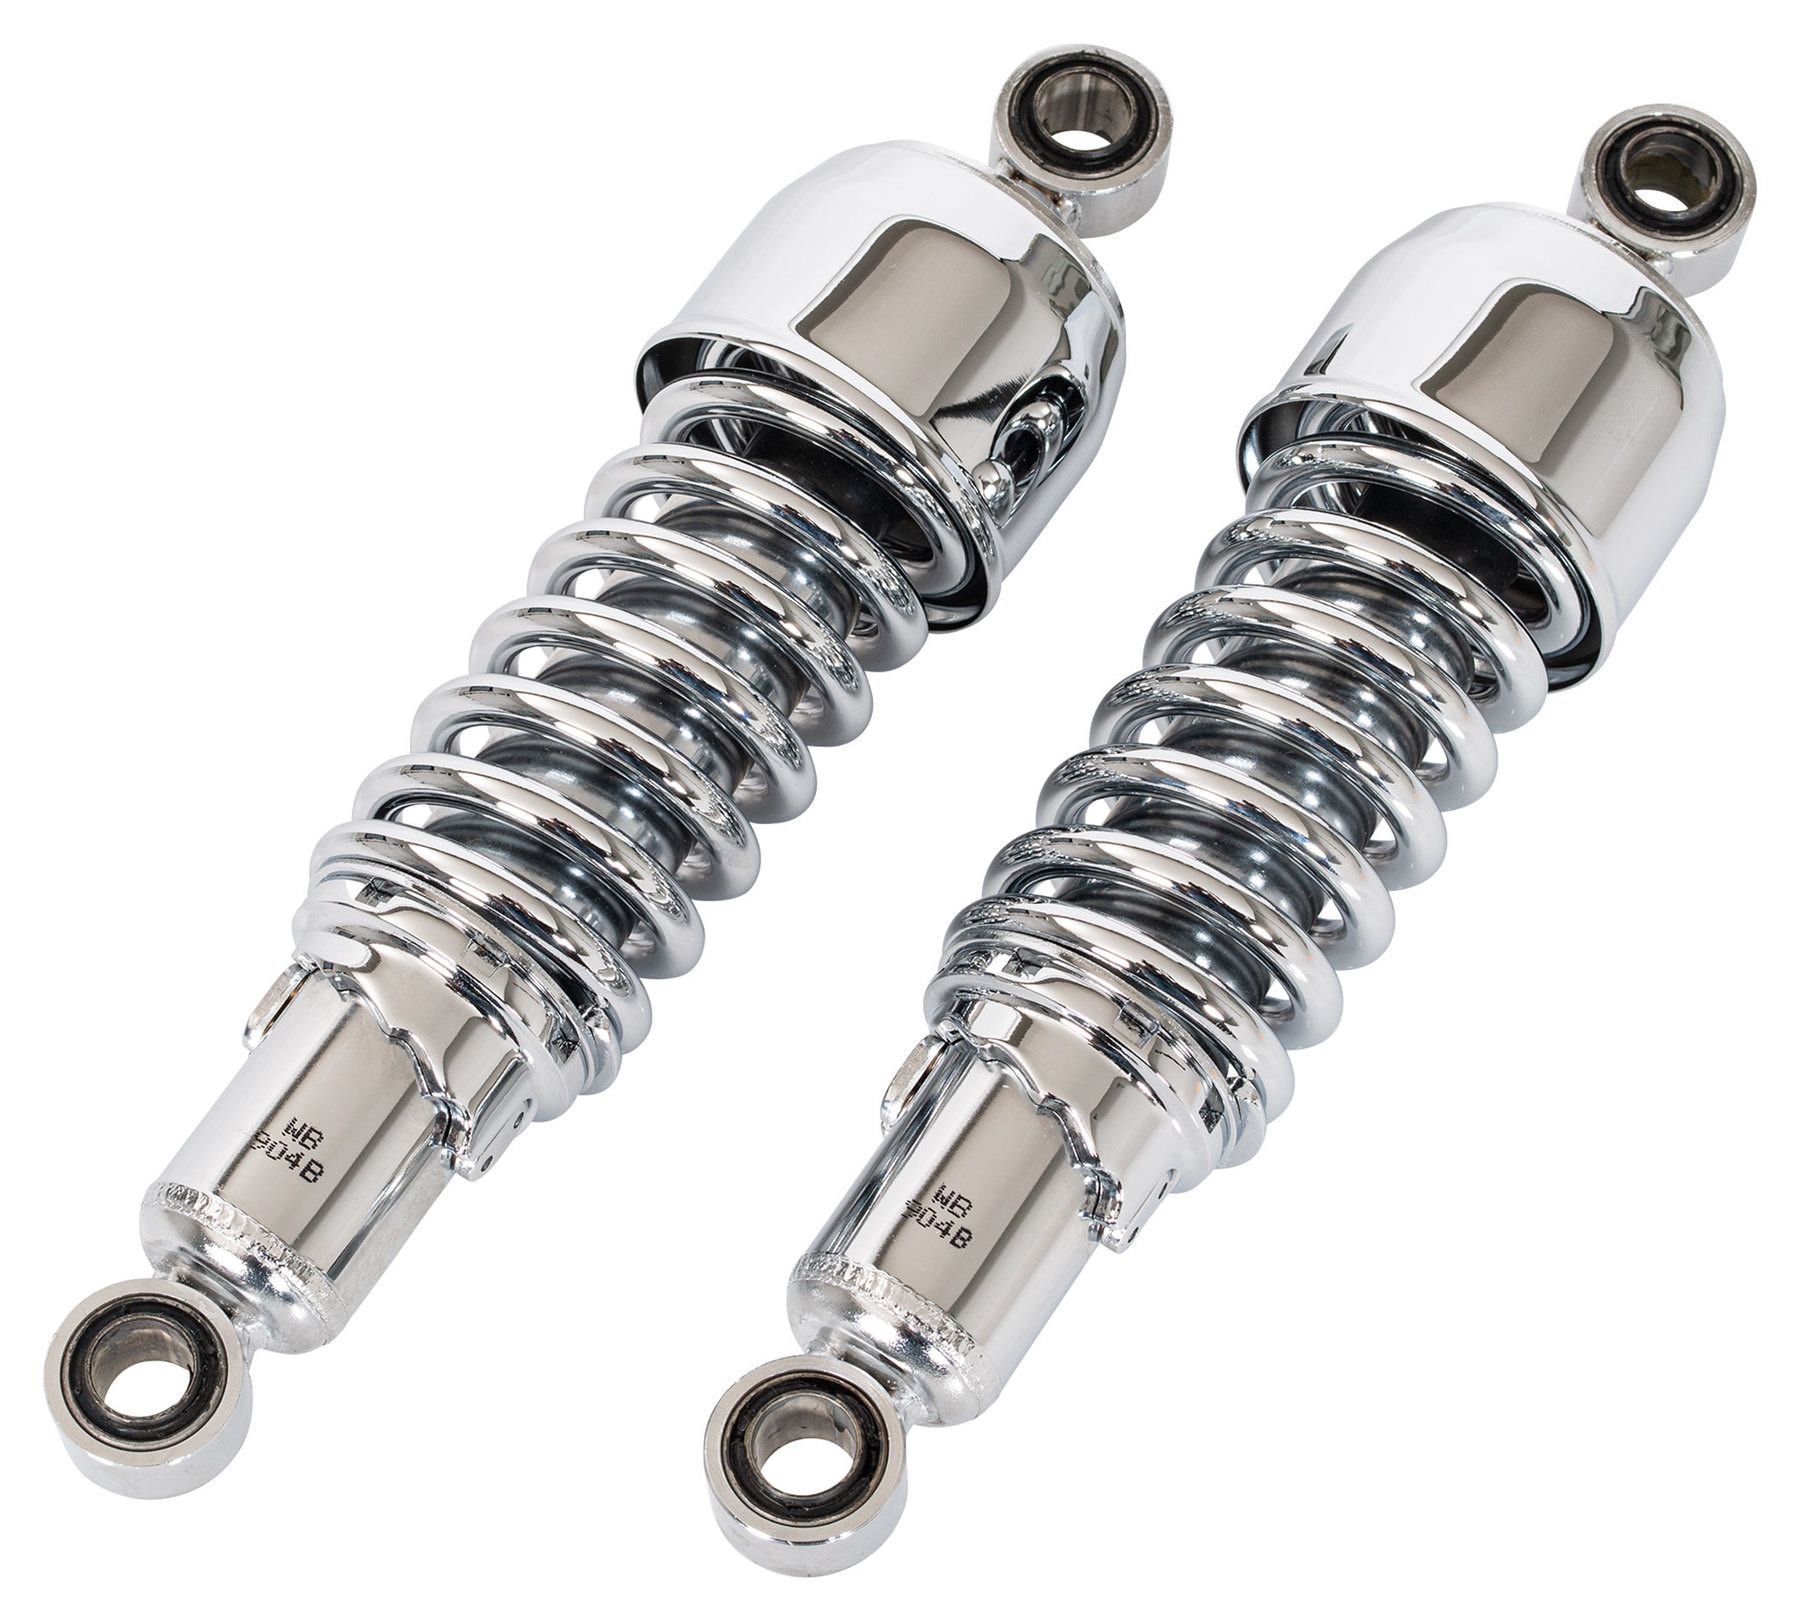 Buy Universal Shock Absorbers in black and Pair | Louis motorcycle clothing  and technology